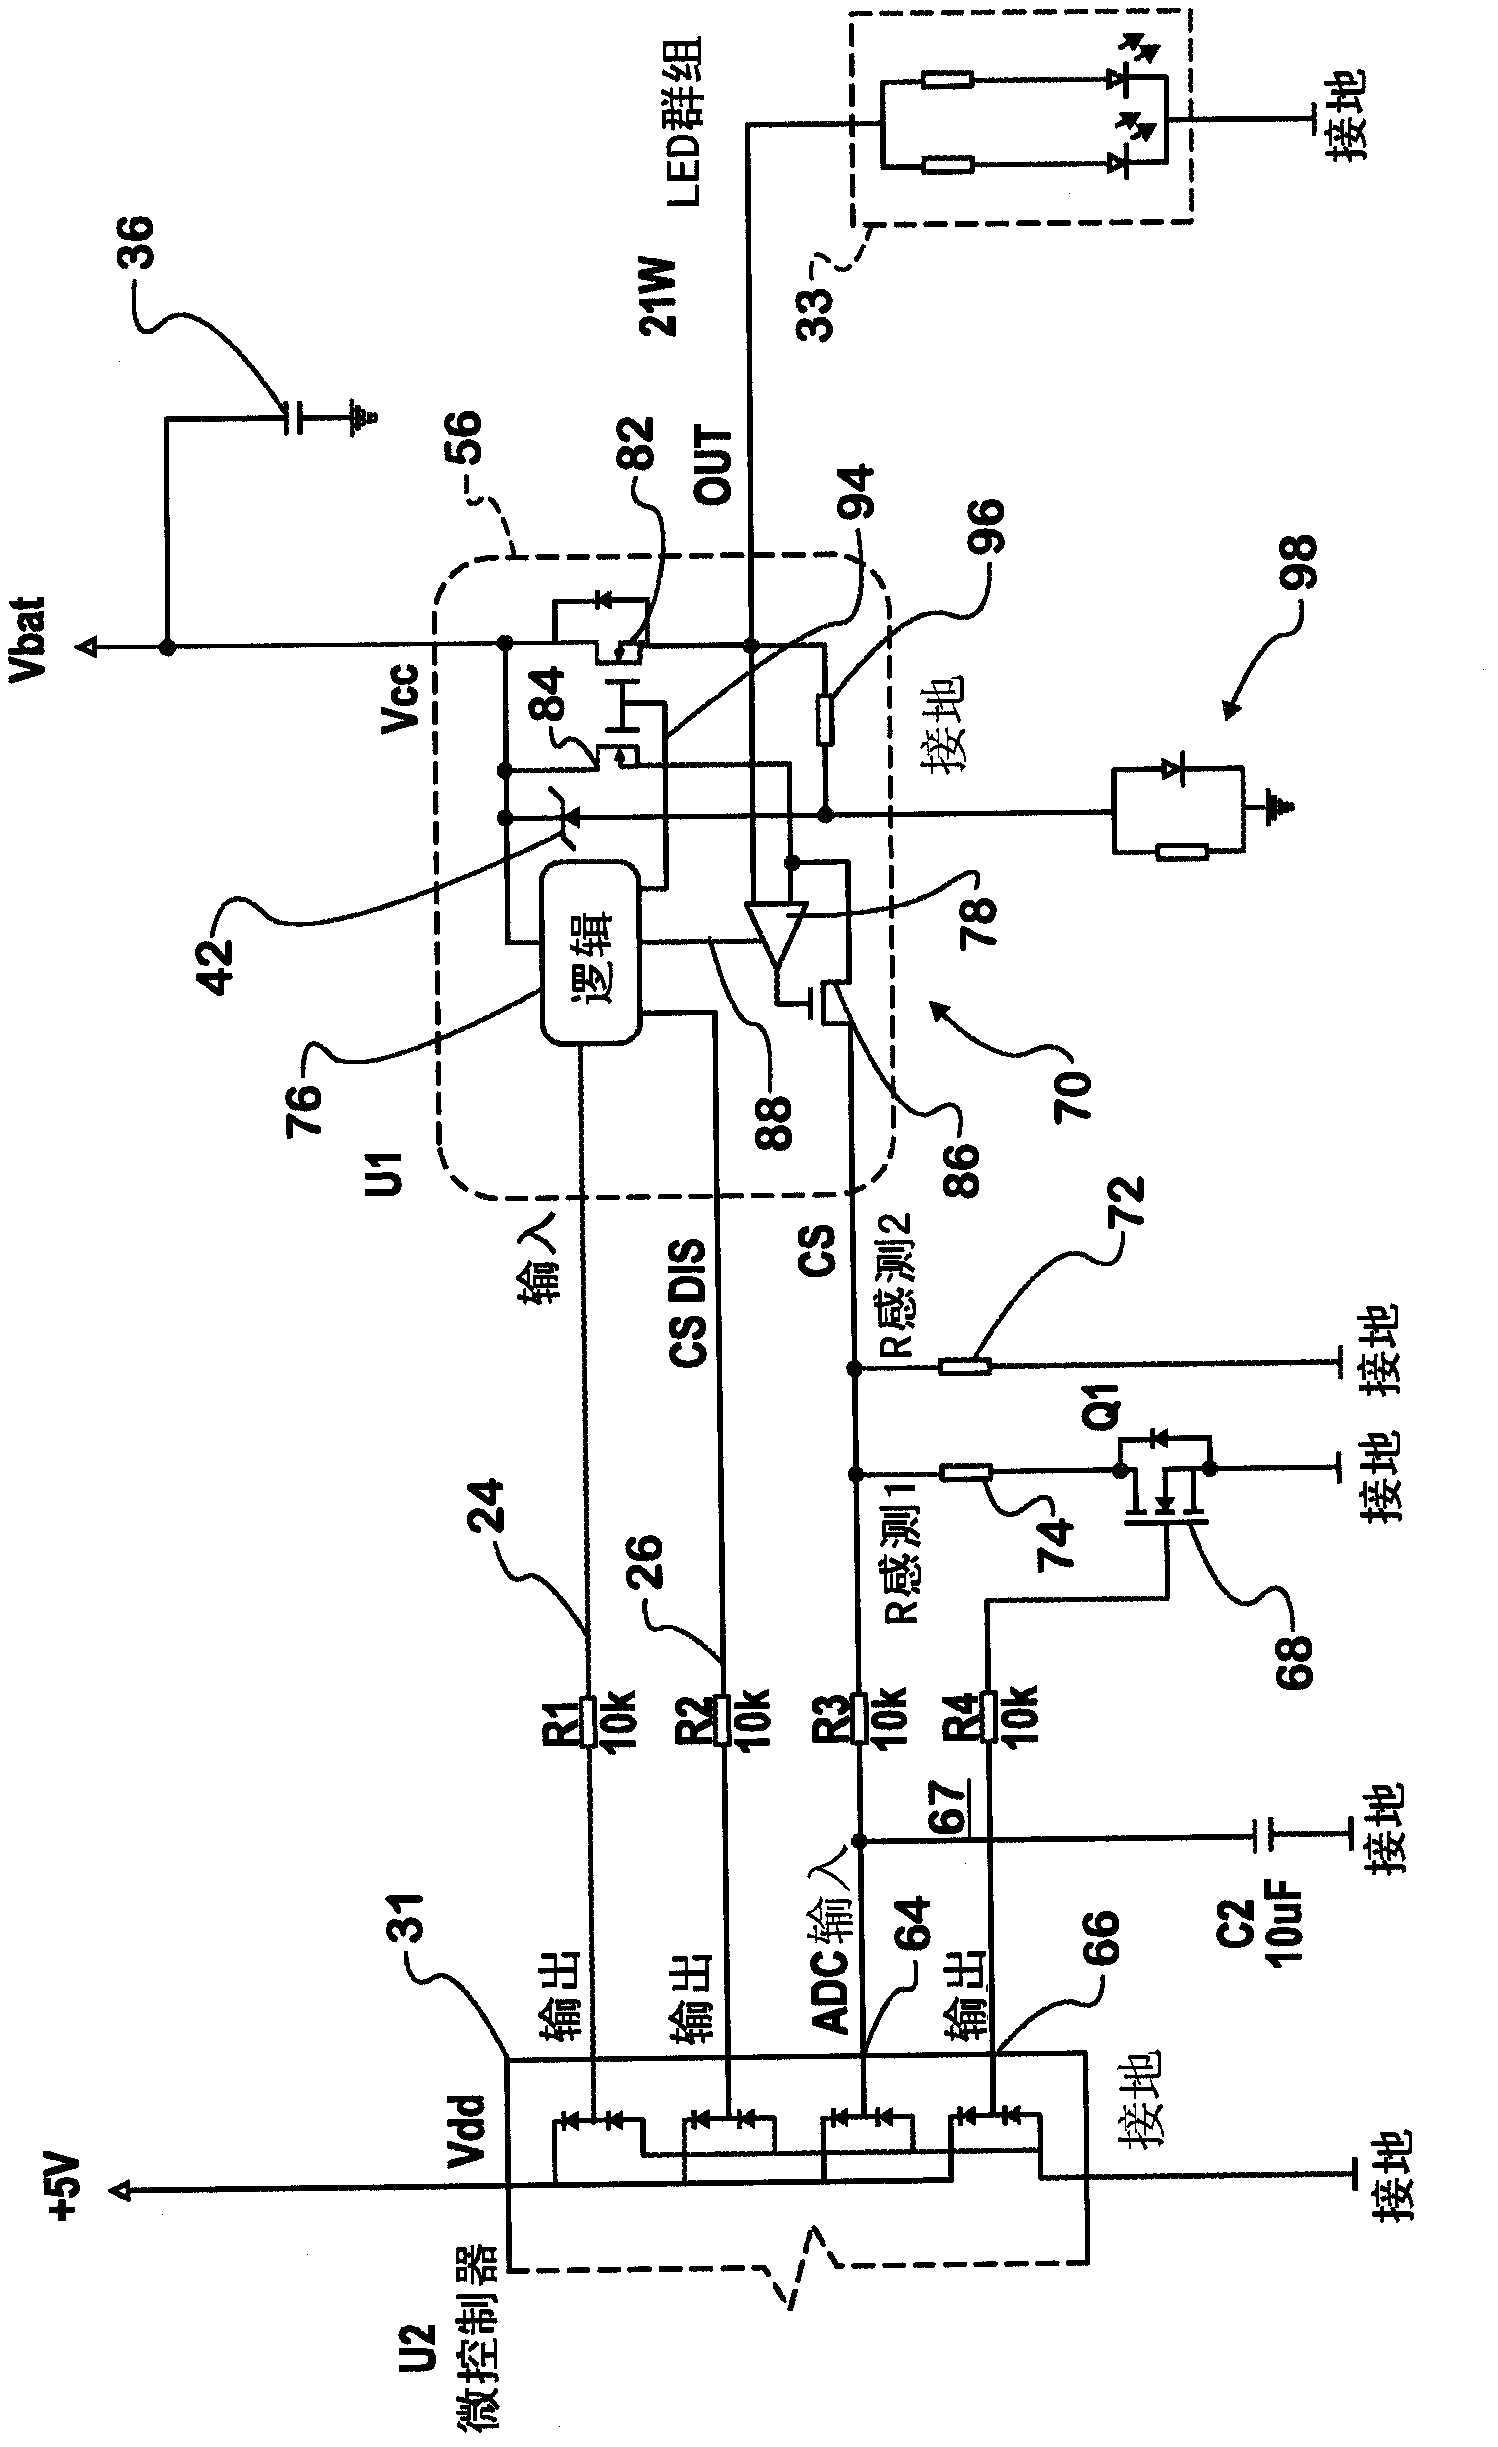 Realtime computer controlled system providing differentiation of incandescent and light emitting diode lamps